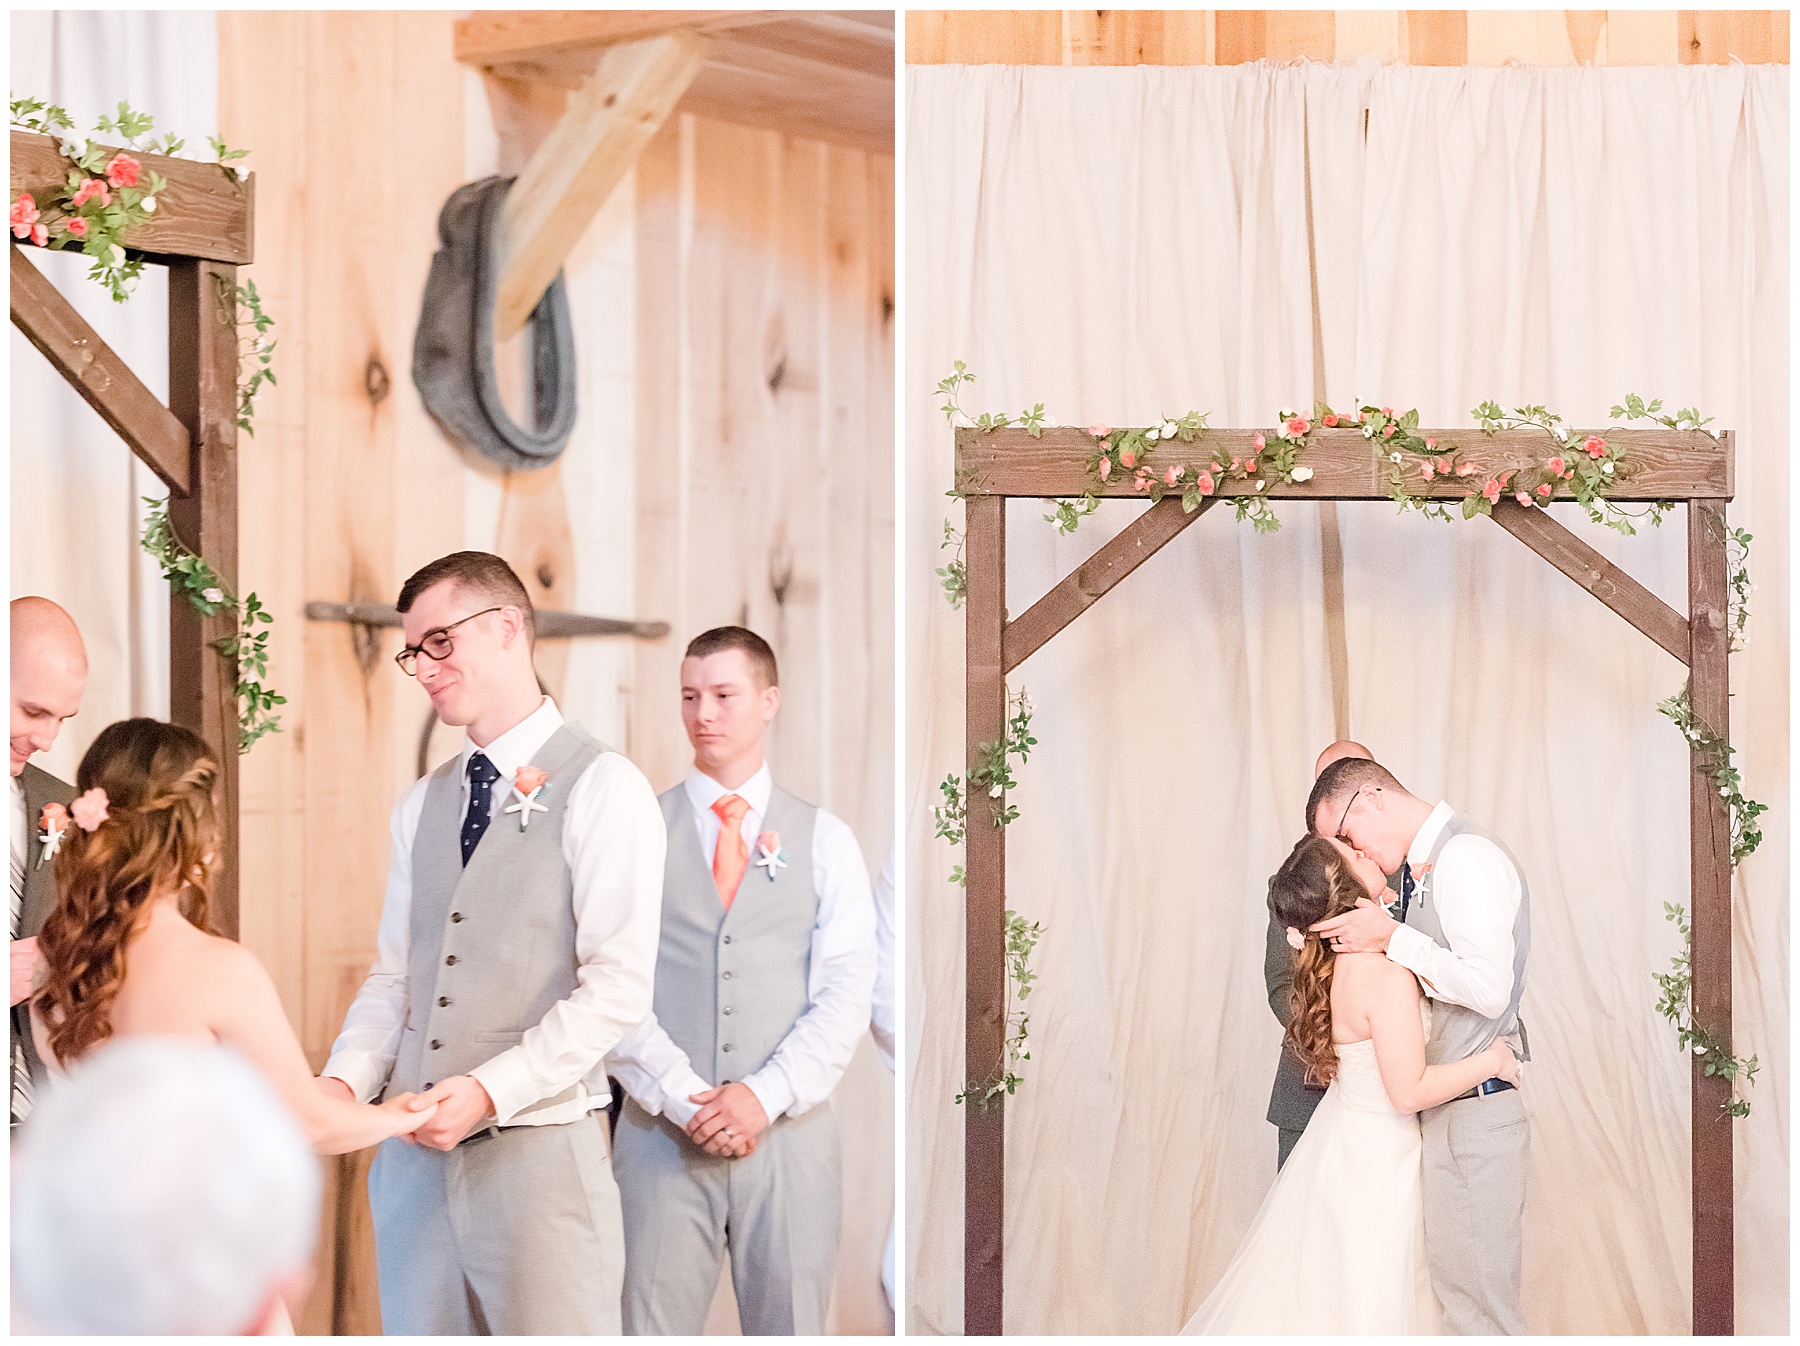 Bride and groom kissing under wooden arch in wedding photography favorites